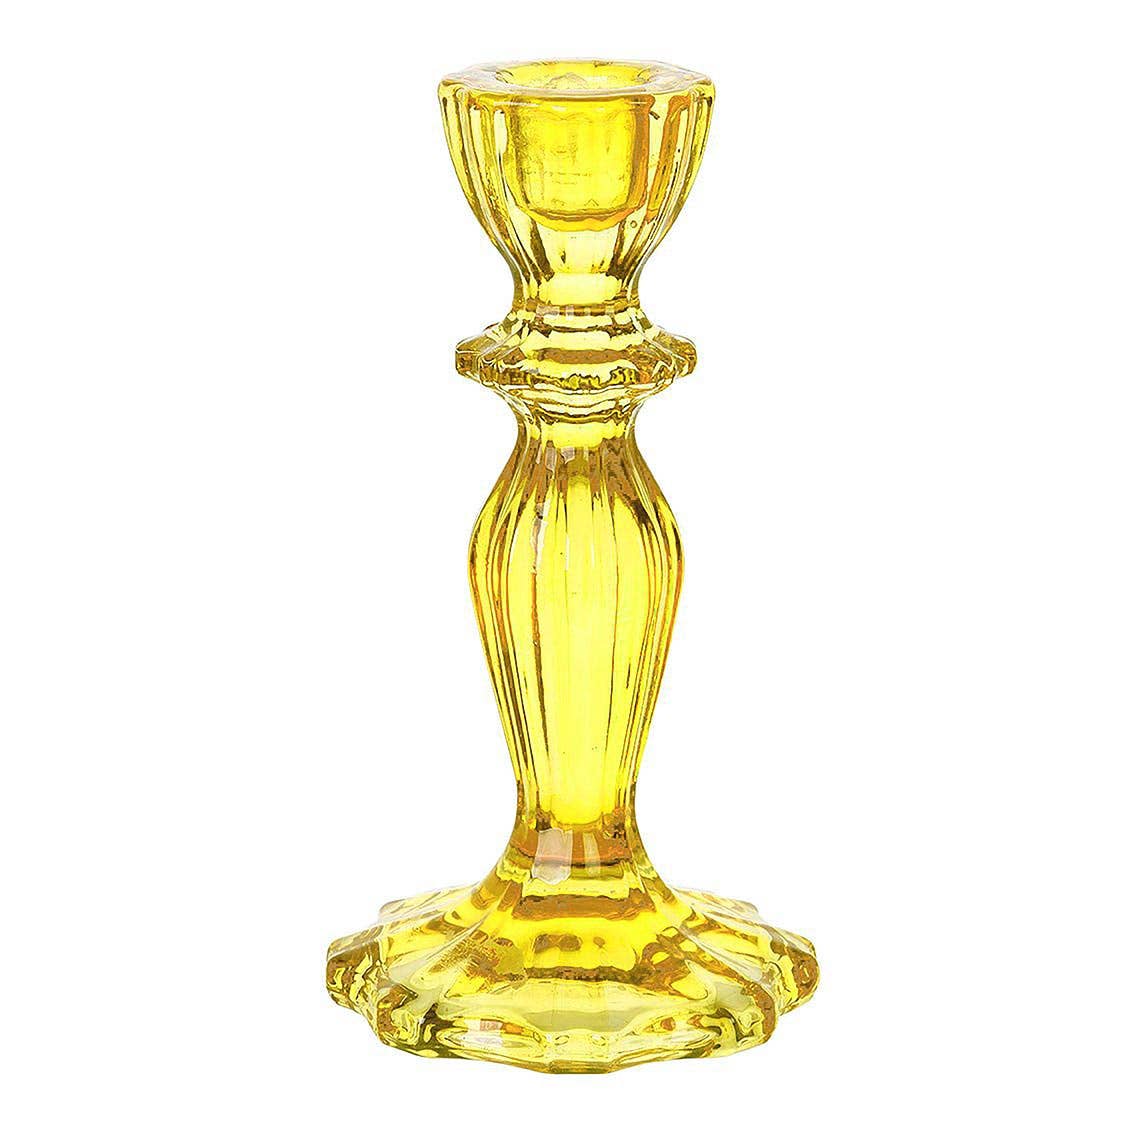 Yellow Glass Candlestick Holder by Talking Tables. Boho Candlestick. Vintage Candle Holder. Romantic Style CandleStick holder